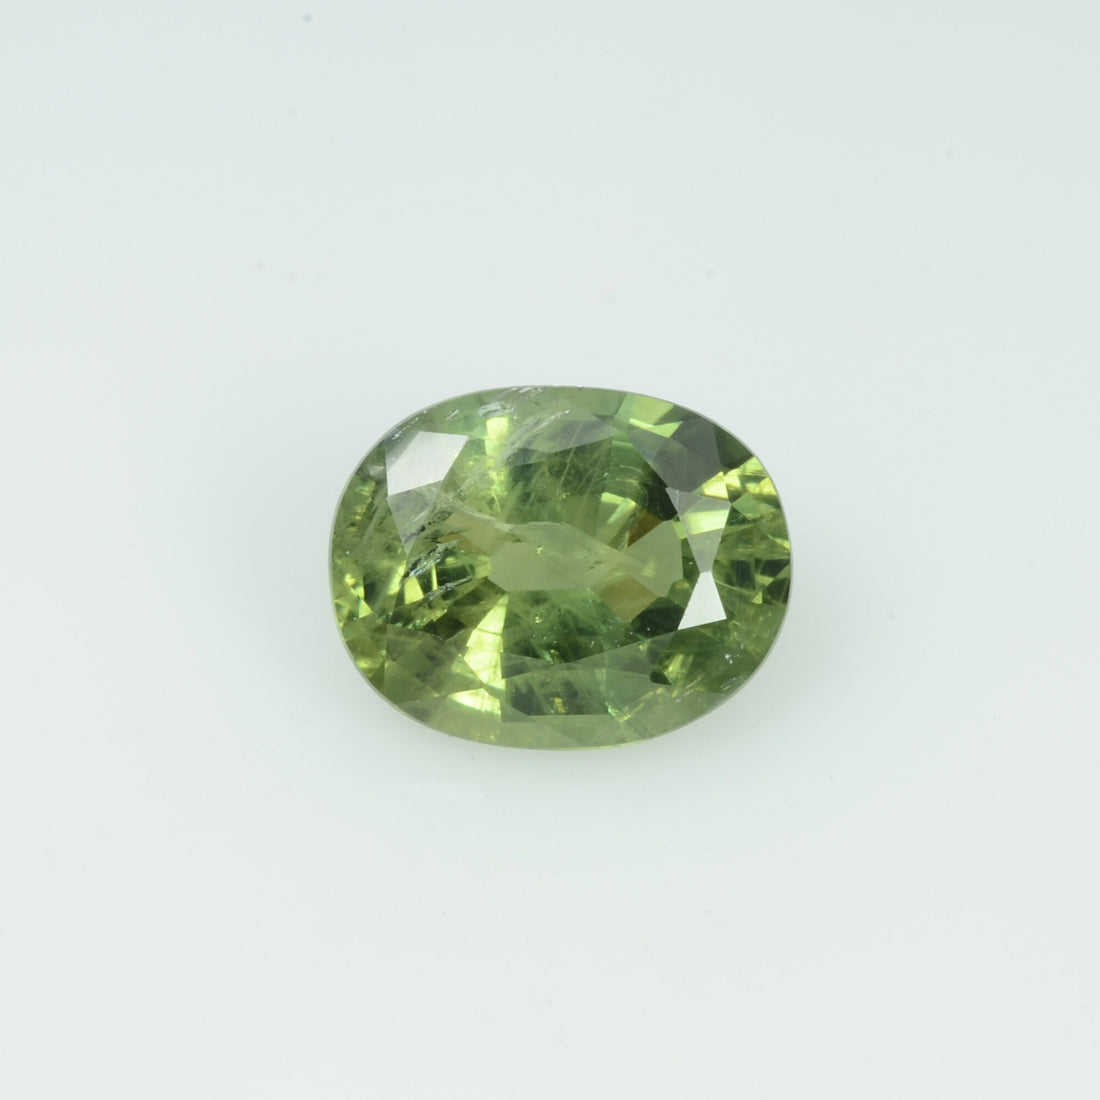 2.19 Cts Natural Green Sapphire Loose Gemstone Oval Cut